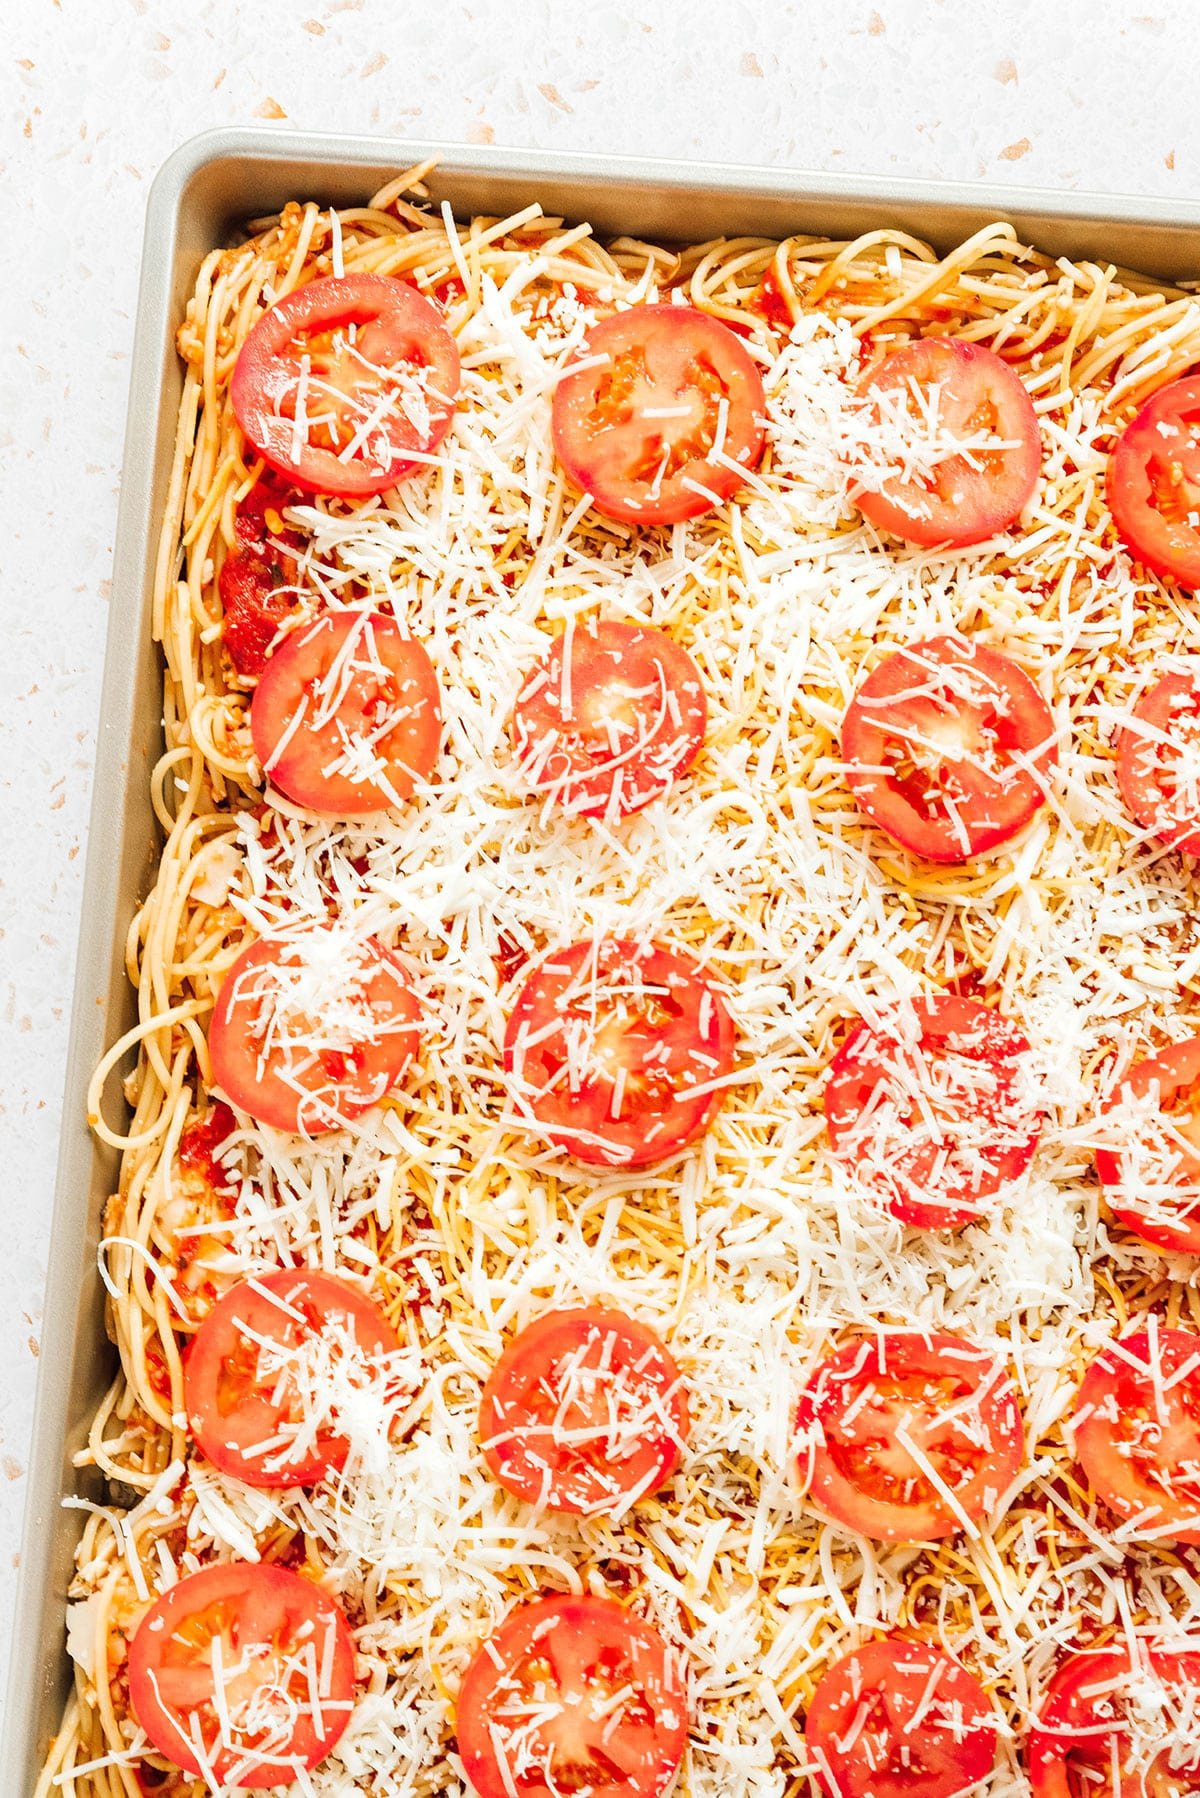 Sliced tomatoes and shredded cheese arranged over a pan of saucy spaghetti.